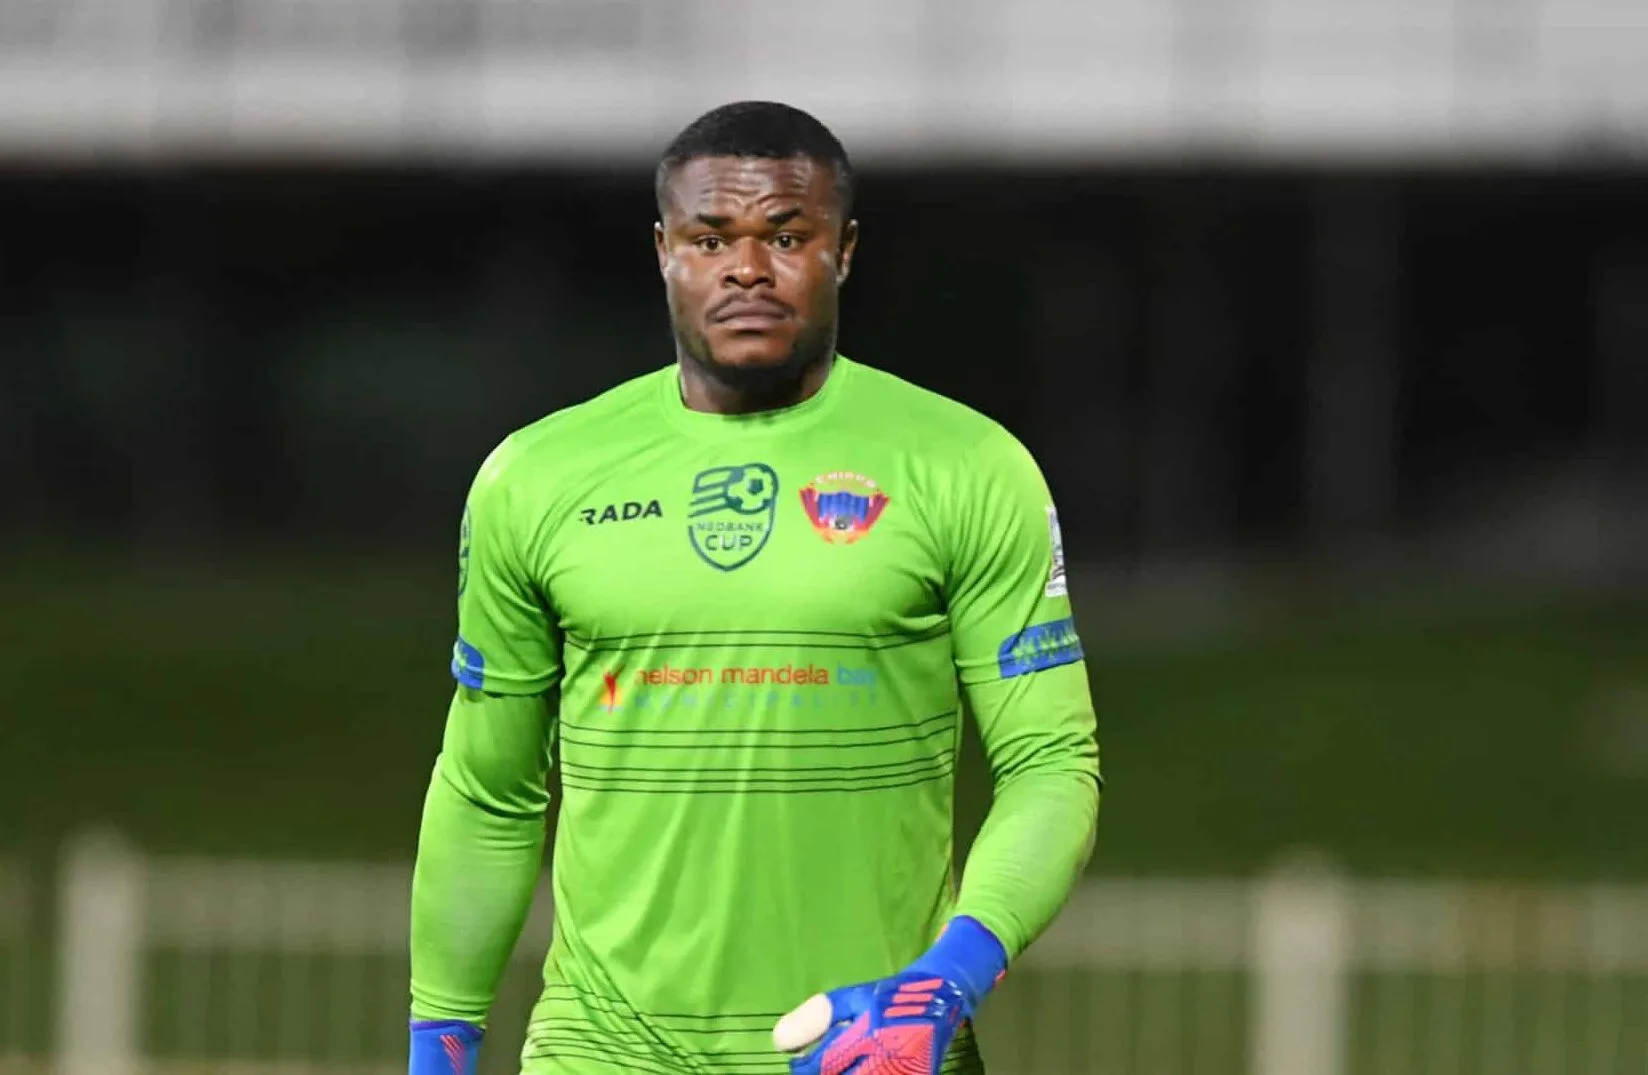 Stanley Nwabali: Player Profile and Biography